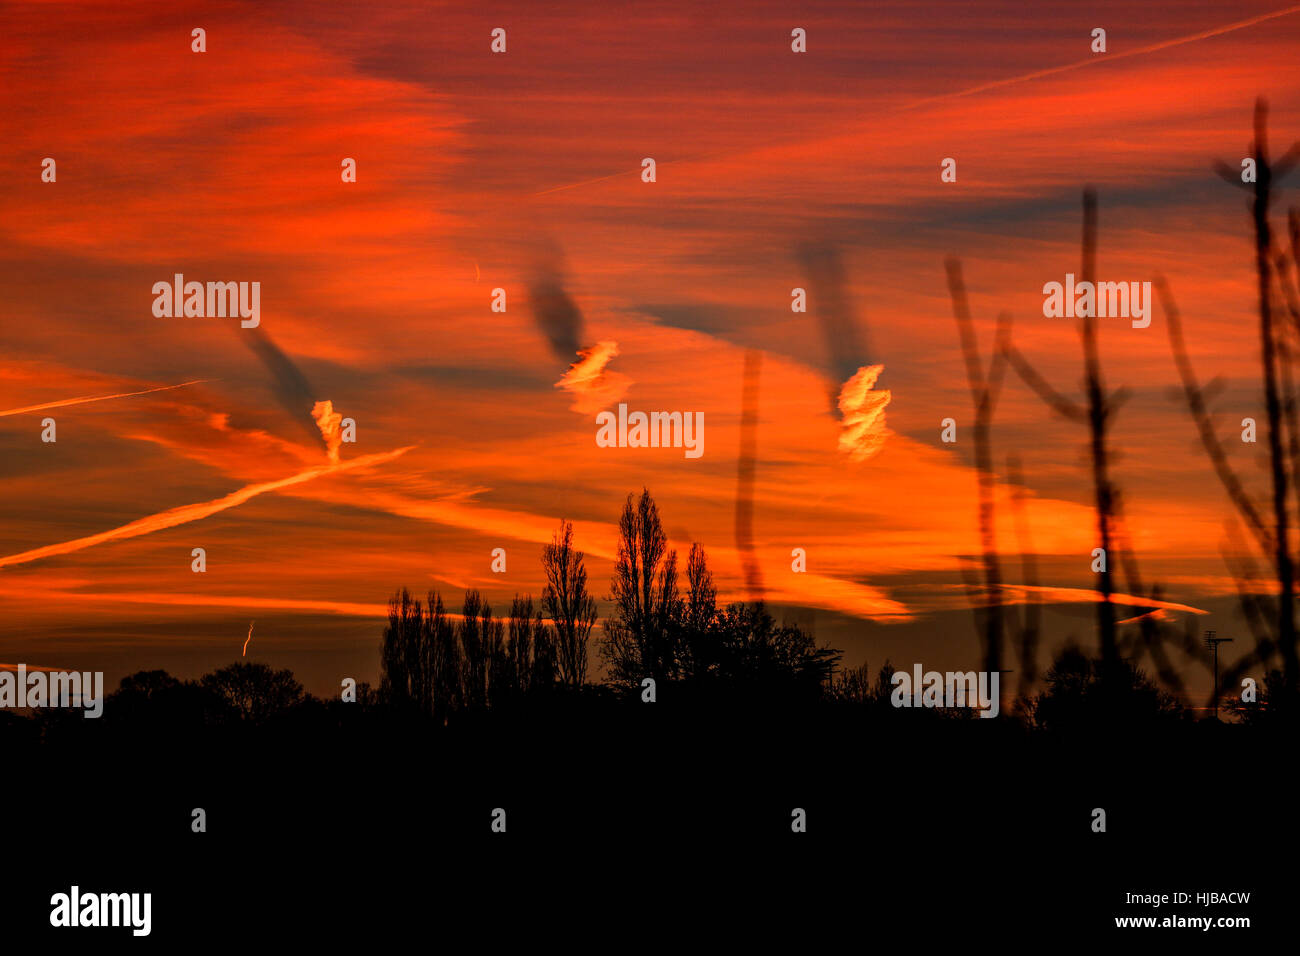 Spiral shaped clouds causing shadows on other clouds in red dawn Stock Photo